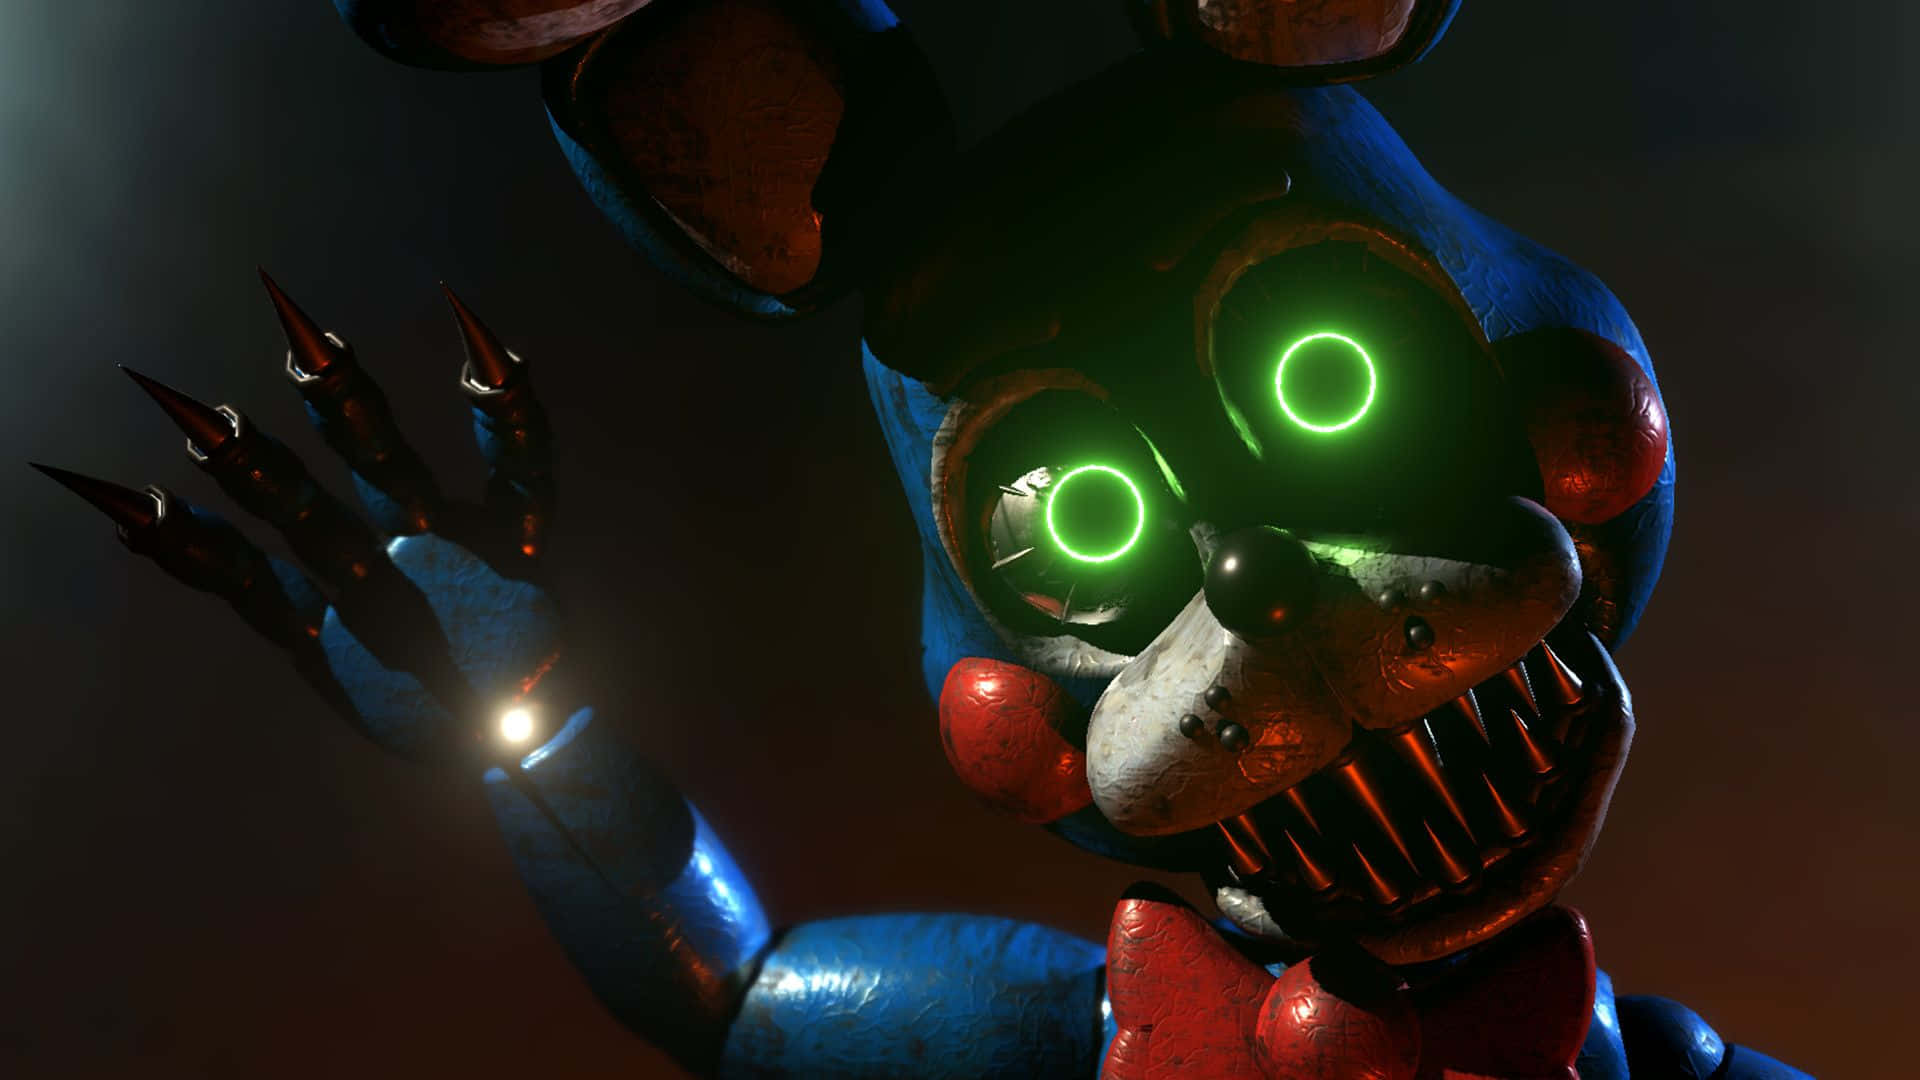 Five Nights At Freddy's The Movie on Vimeo